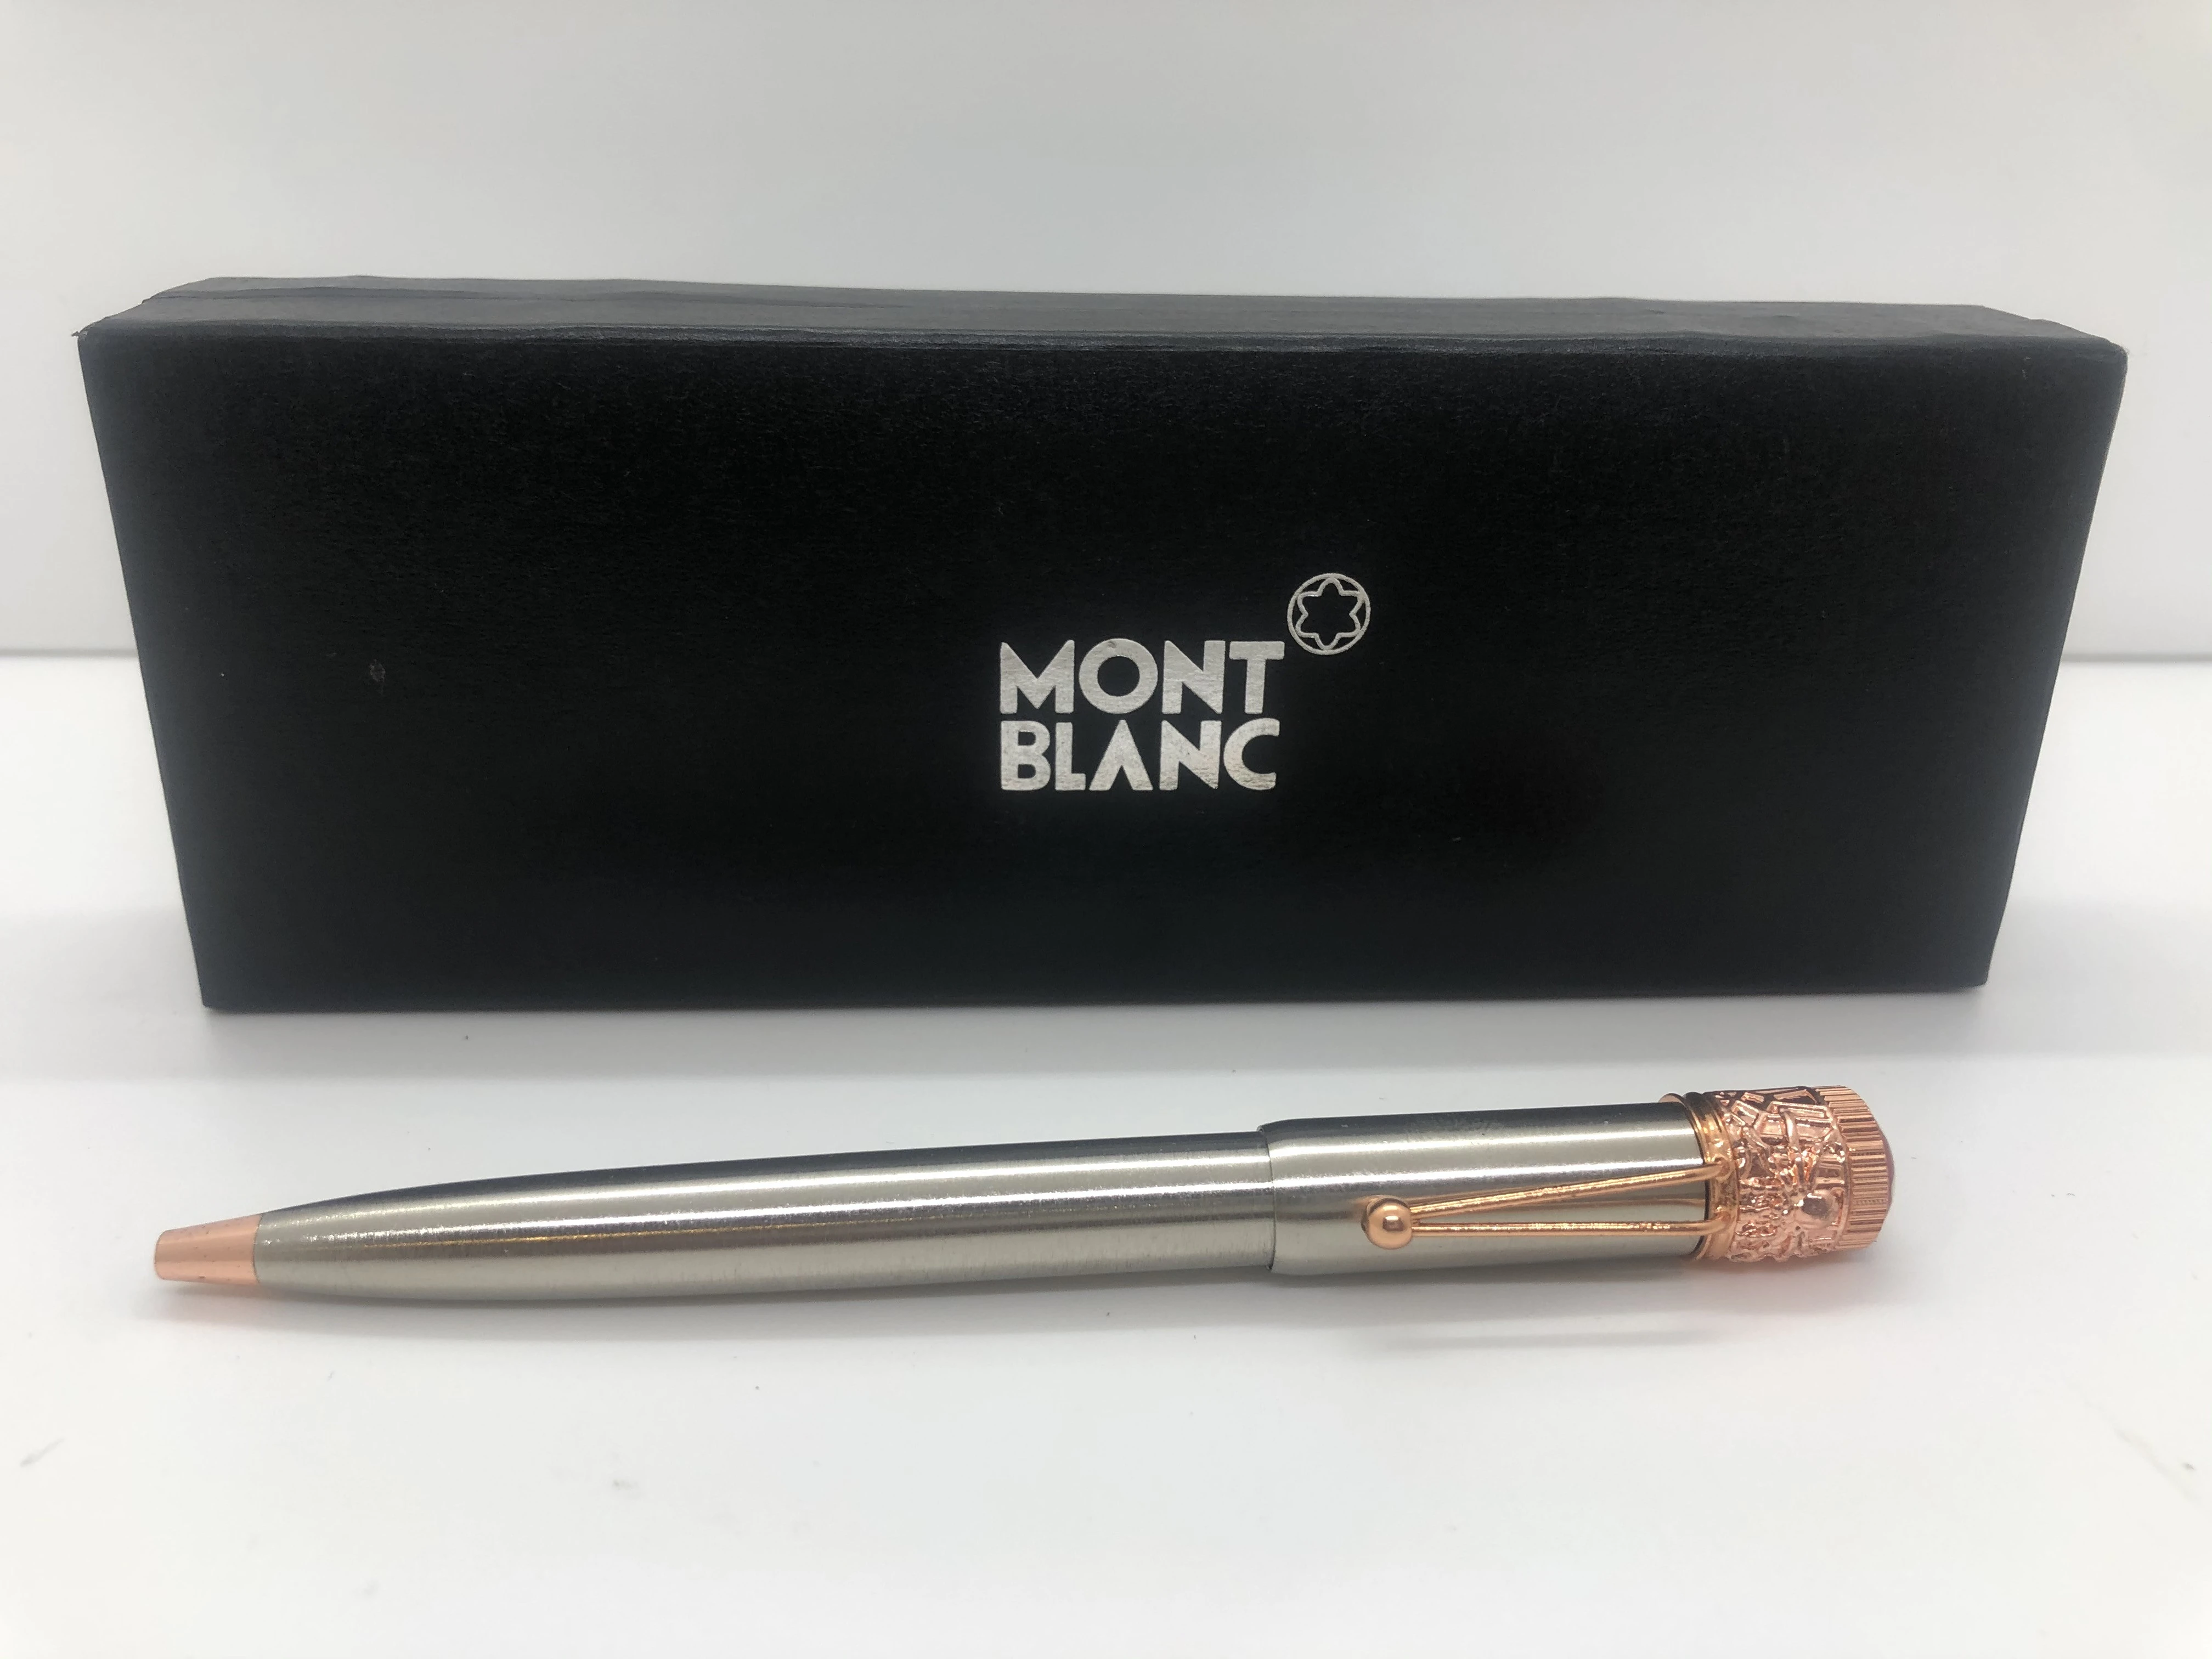 Mont Blanc pen, rose gold * silver - with engraved touches - with the star brand logo above